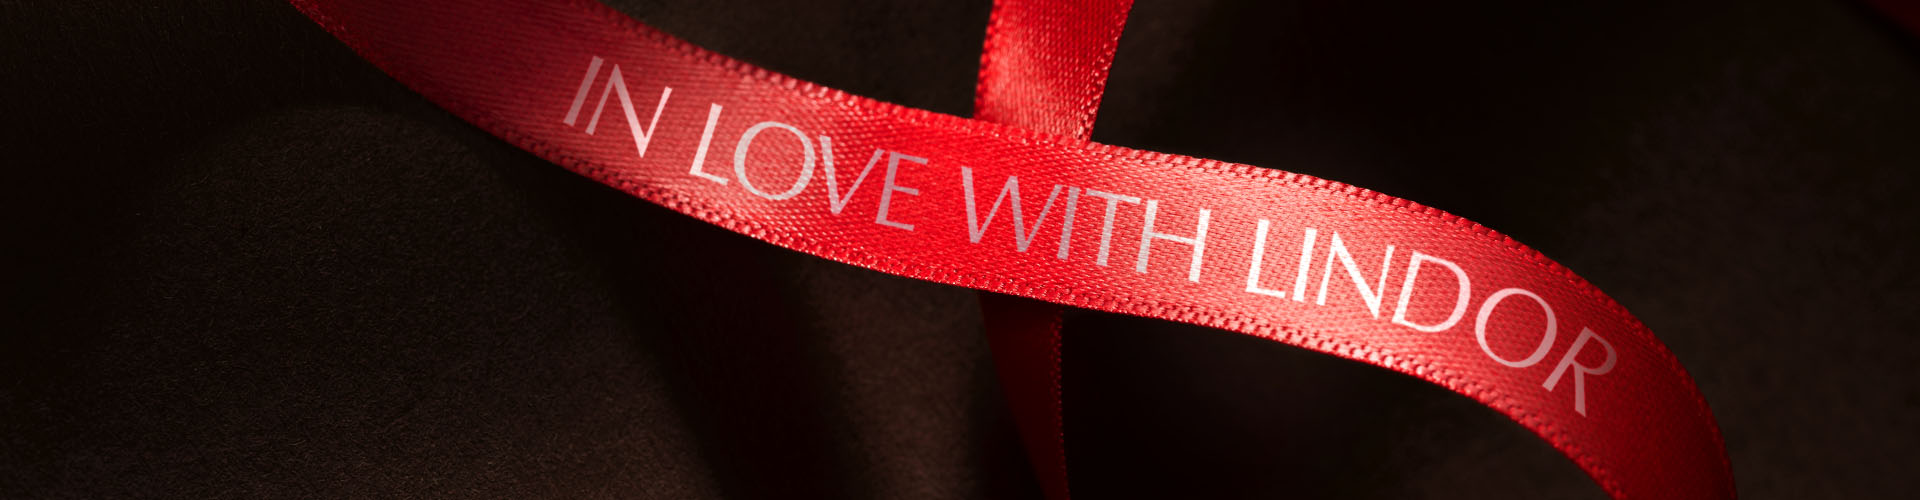 A red bow with the text “In love with LINDOR” on a brown silky background (Photo)